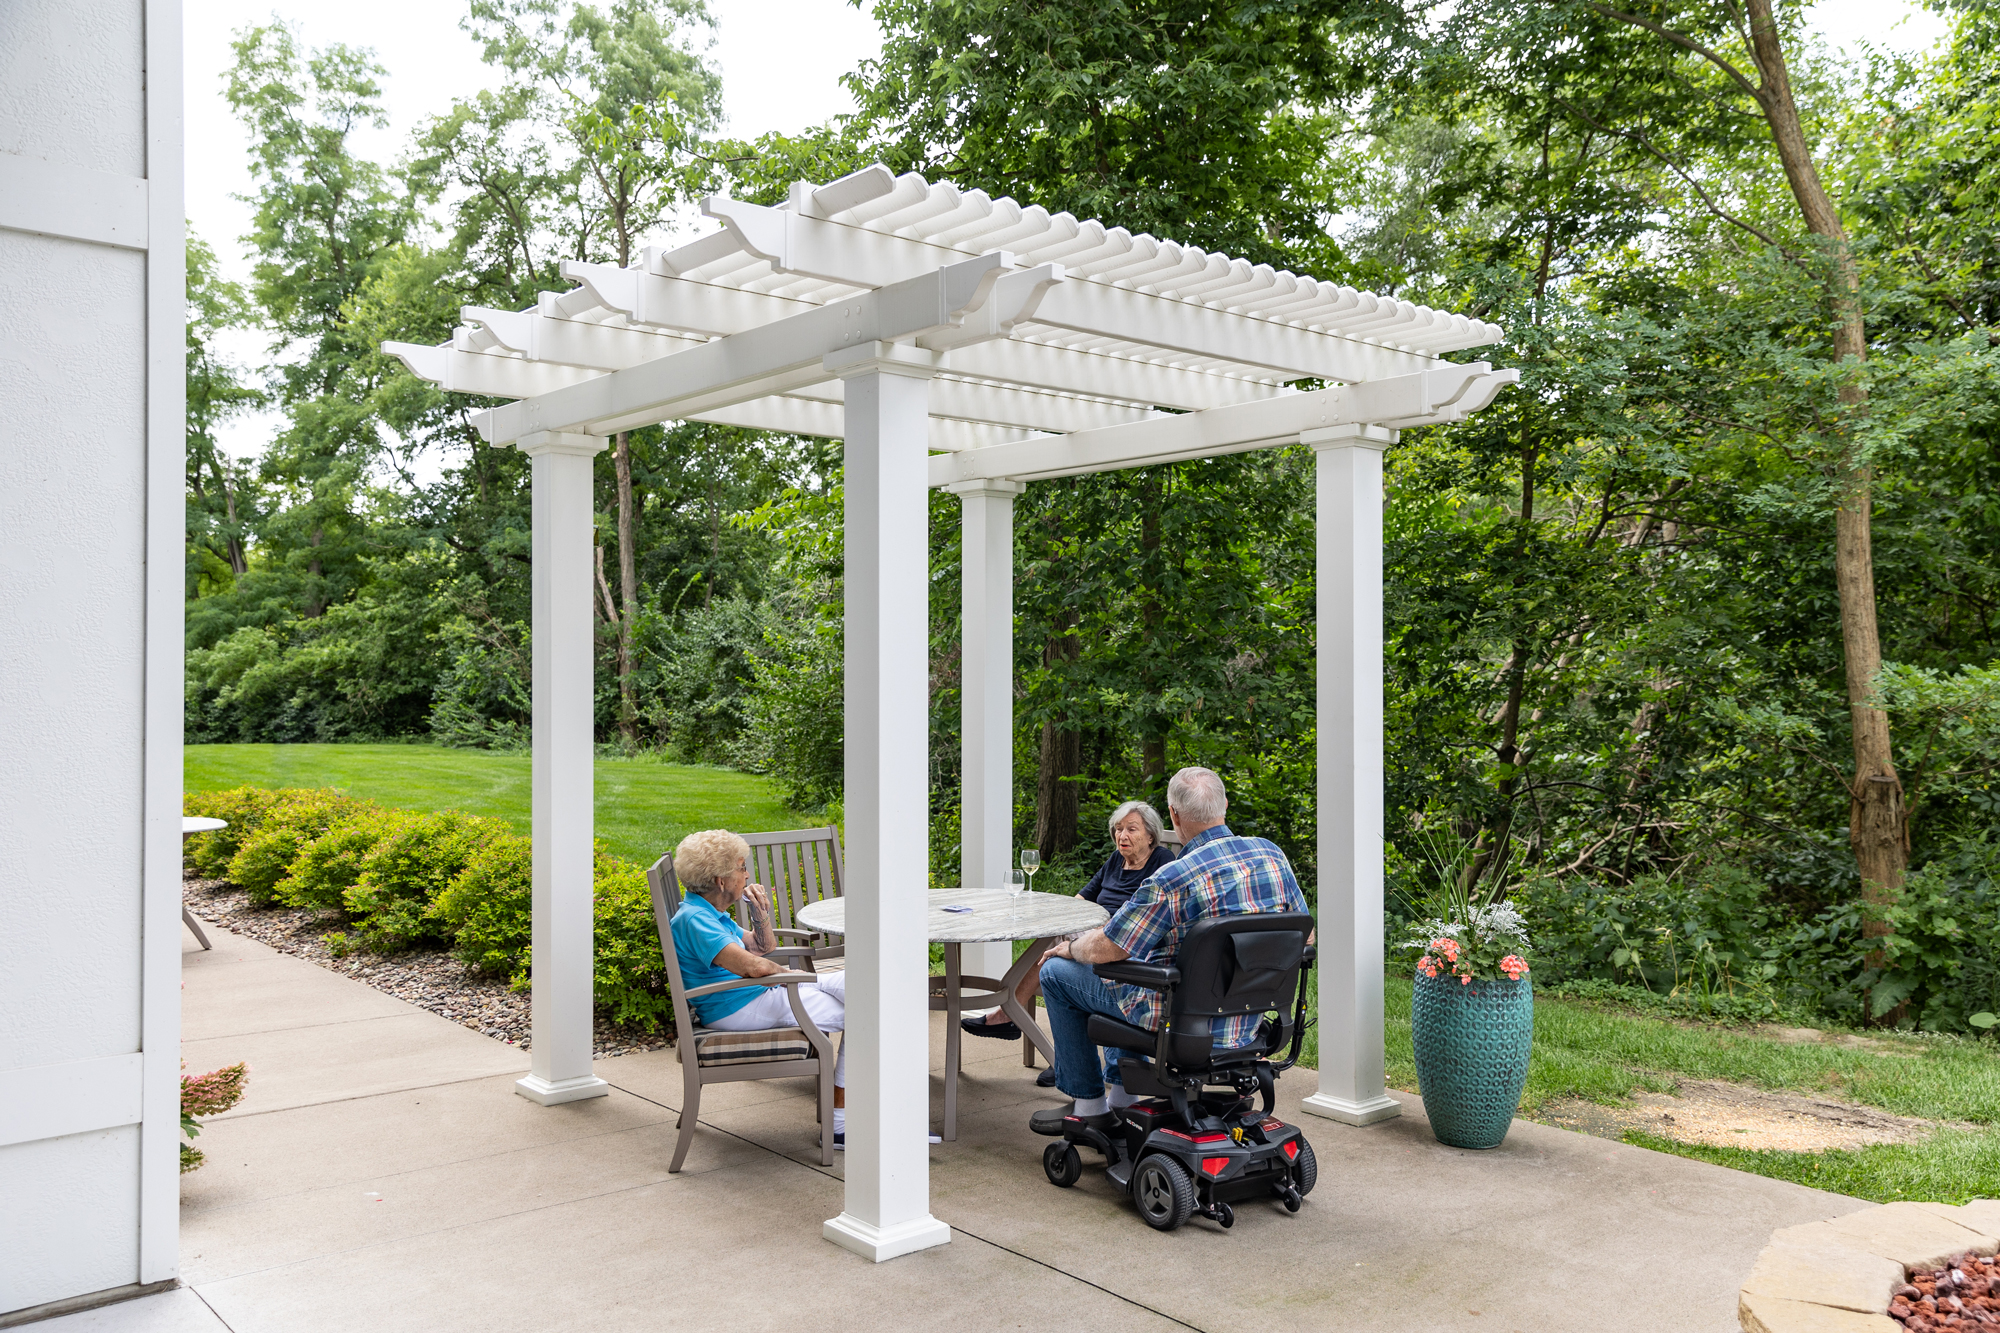 Seniors enjoying outdoor activities together at independent living community